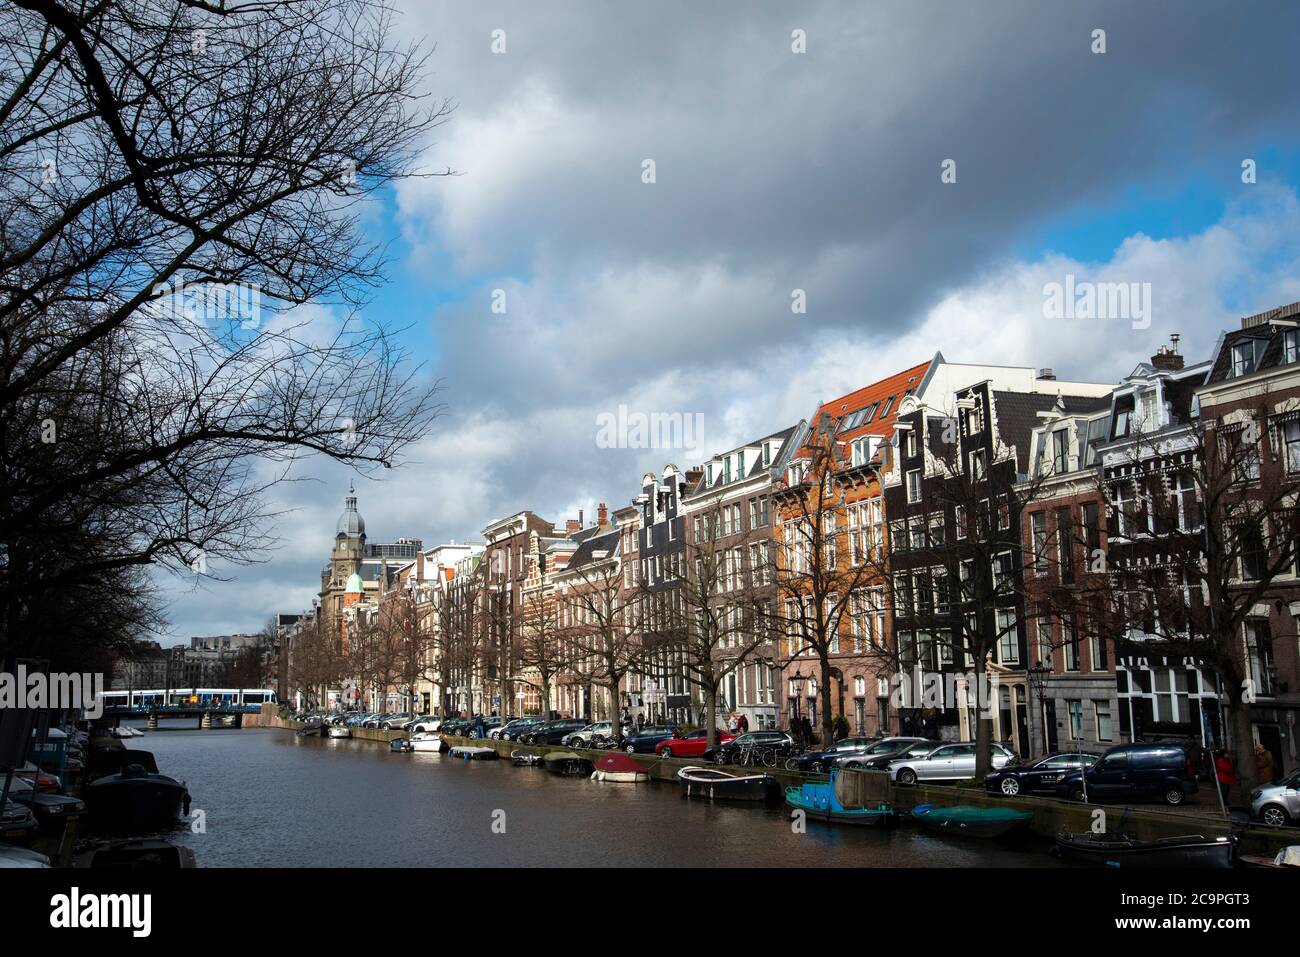 Stately houses line the banks of Prinsengrach, one of the principle canals in Amsterdam. Stock Photo